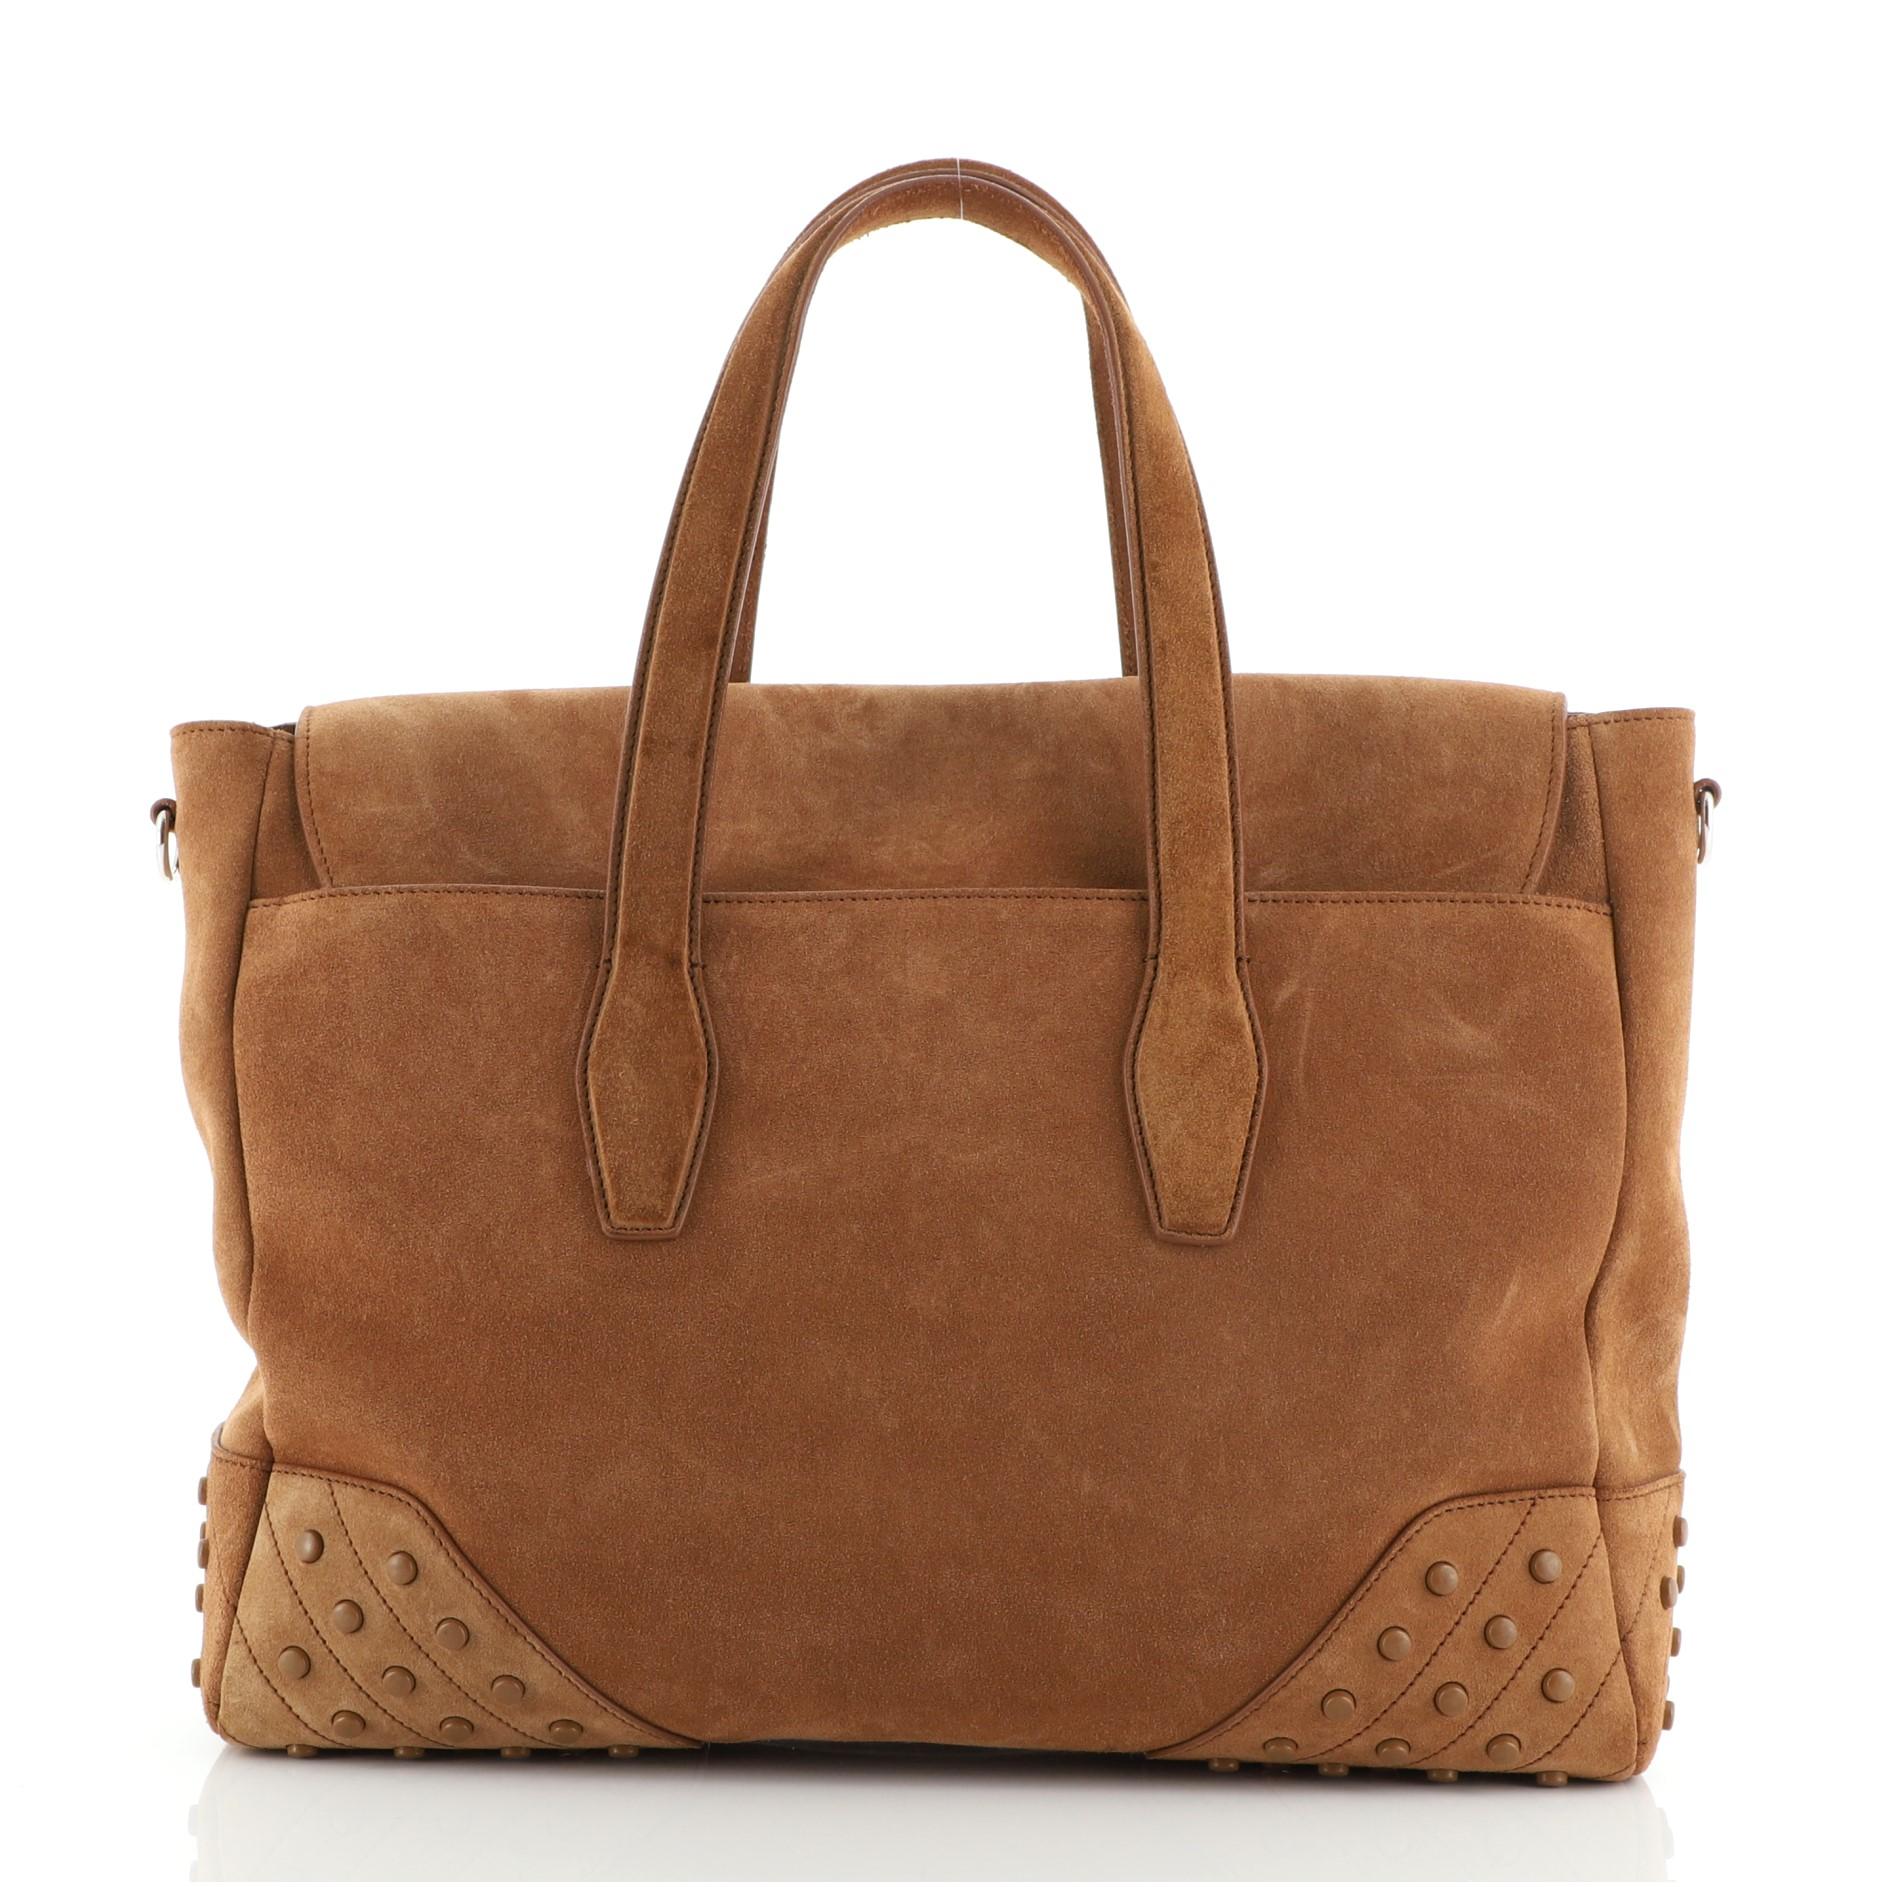 Tod's Envelope Convertible Tote Suede Medium
Brown

Condition Details: Scuffs on exterior, wear on base corners. Darkening, small marks and pilling on handles, scratches on hardware.

52316MSC

Height 15